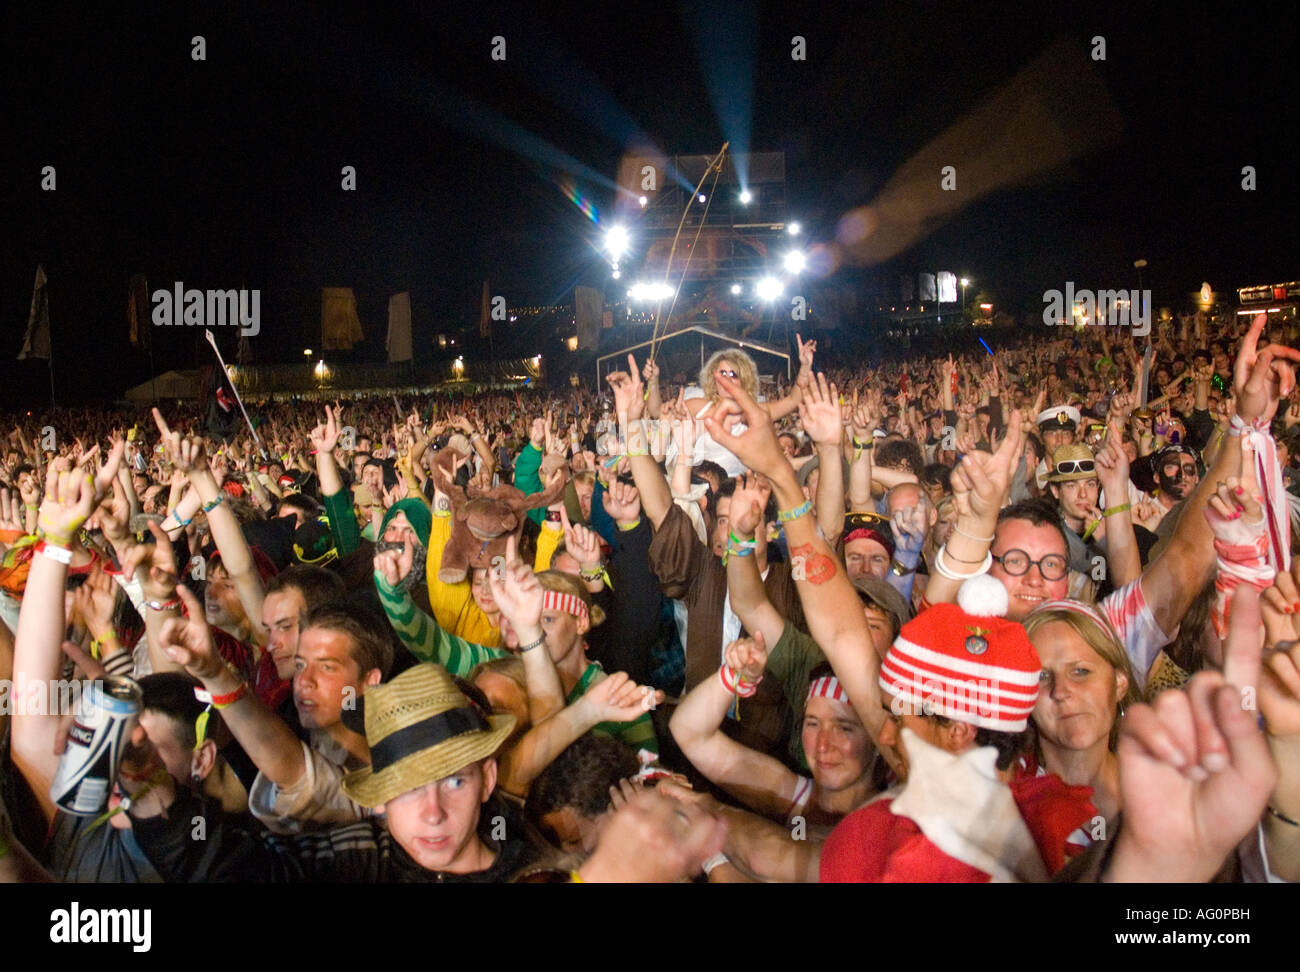 Crowd of spectators cheer and applaud at Bestival music festival in Britain Stock Photo